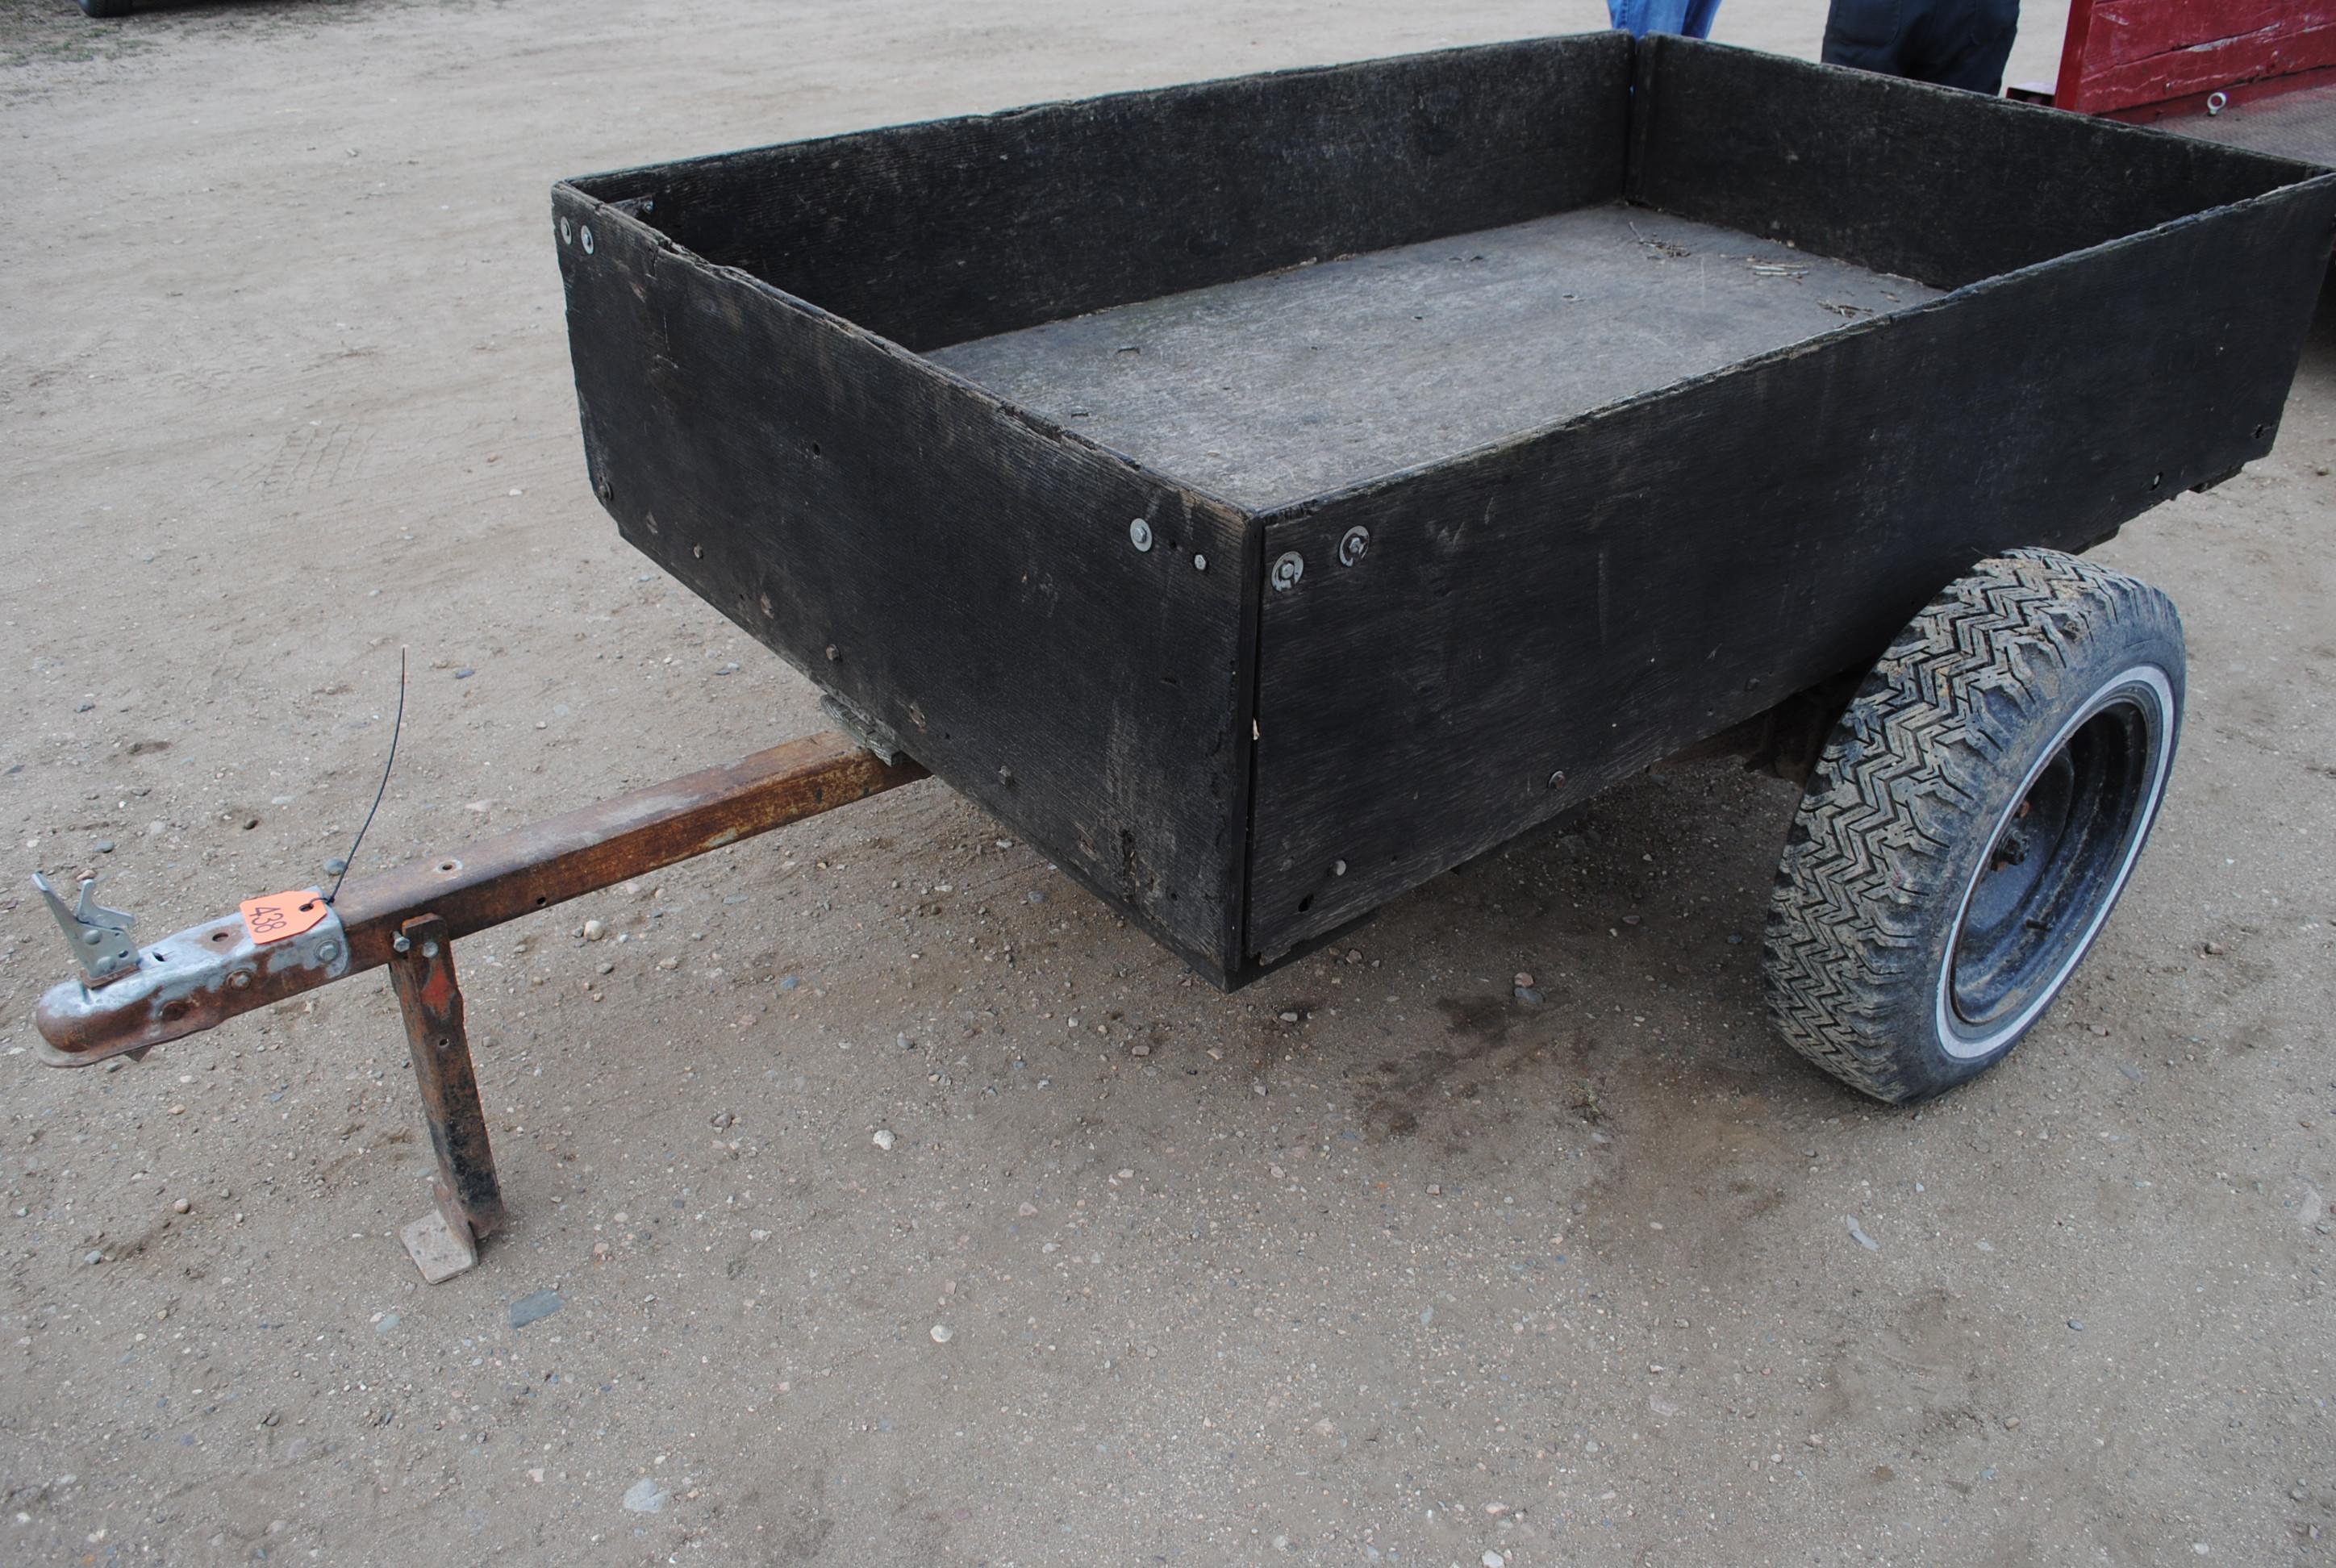 2-Wheel Trailer, 4'x6.5', NO TITLE - farm use only